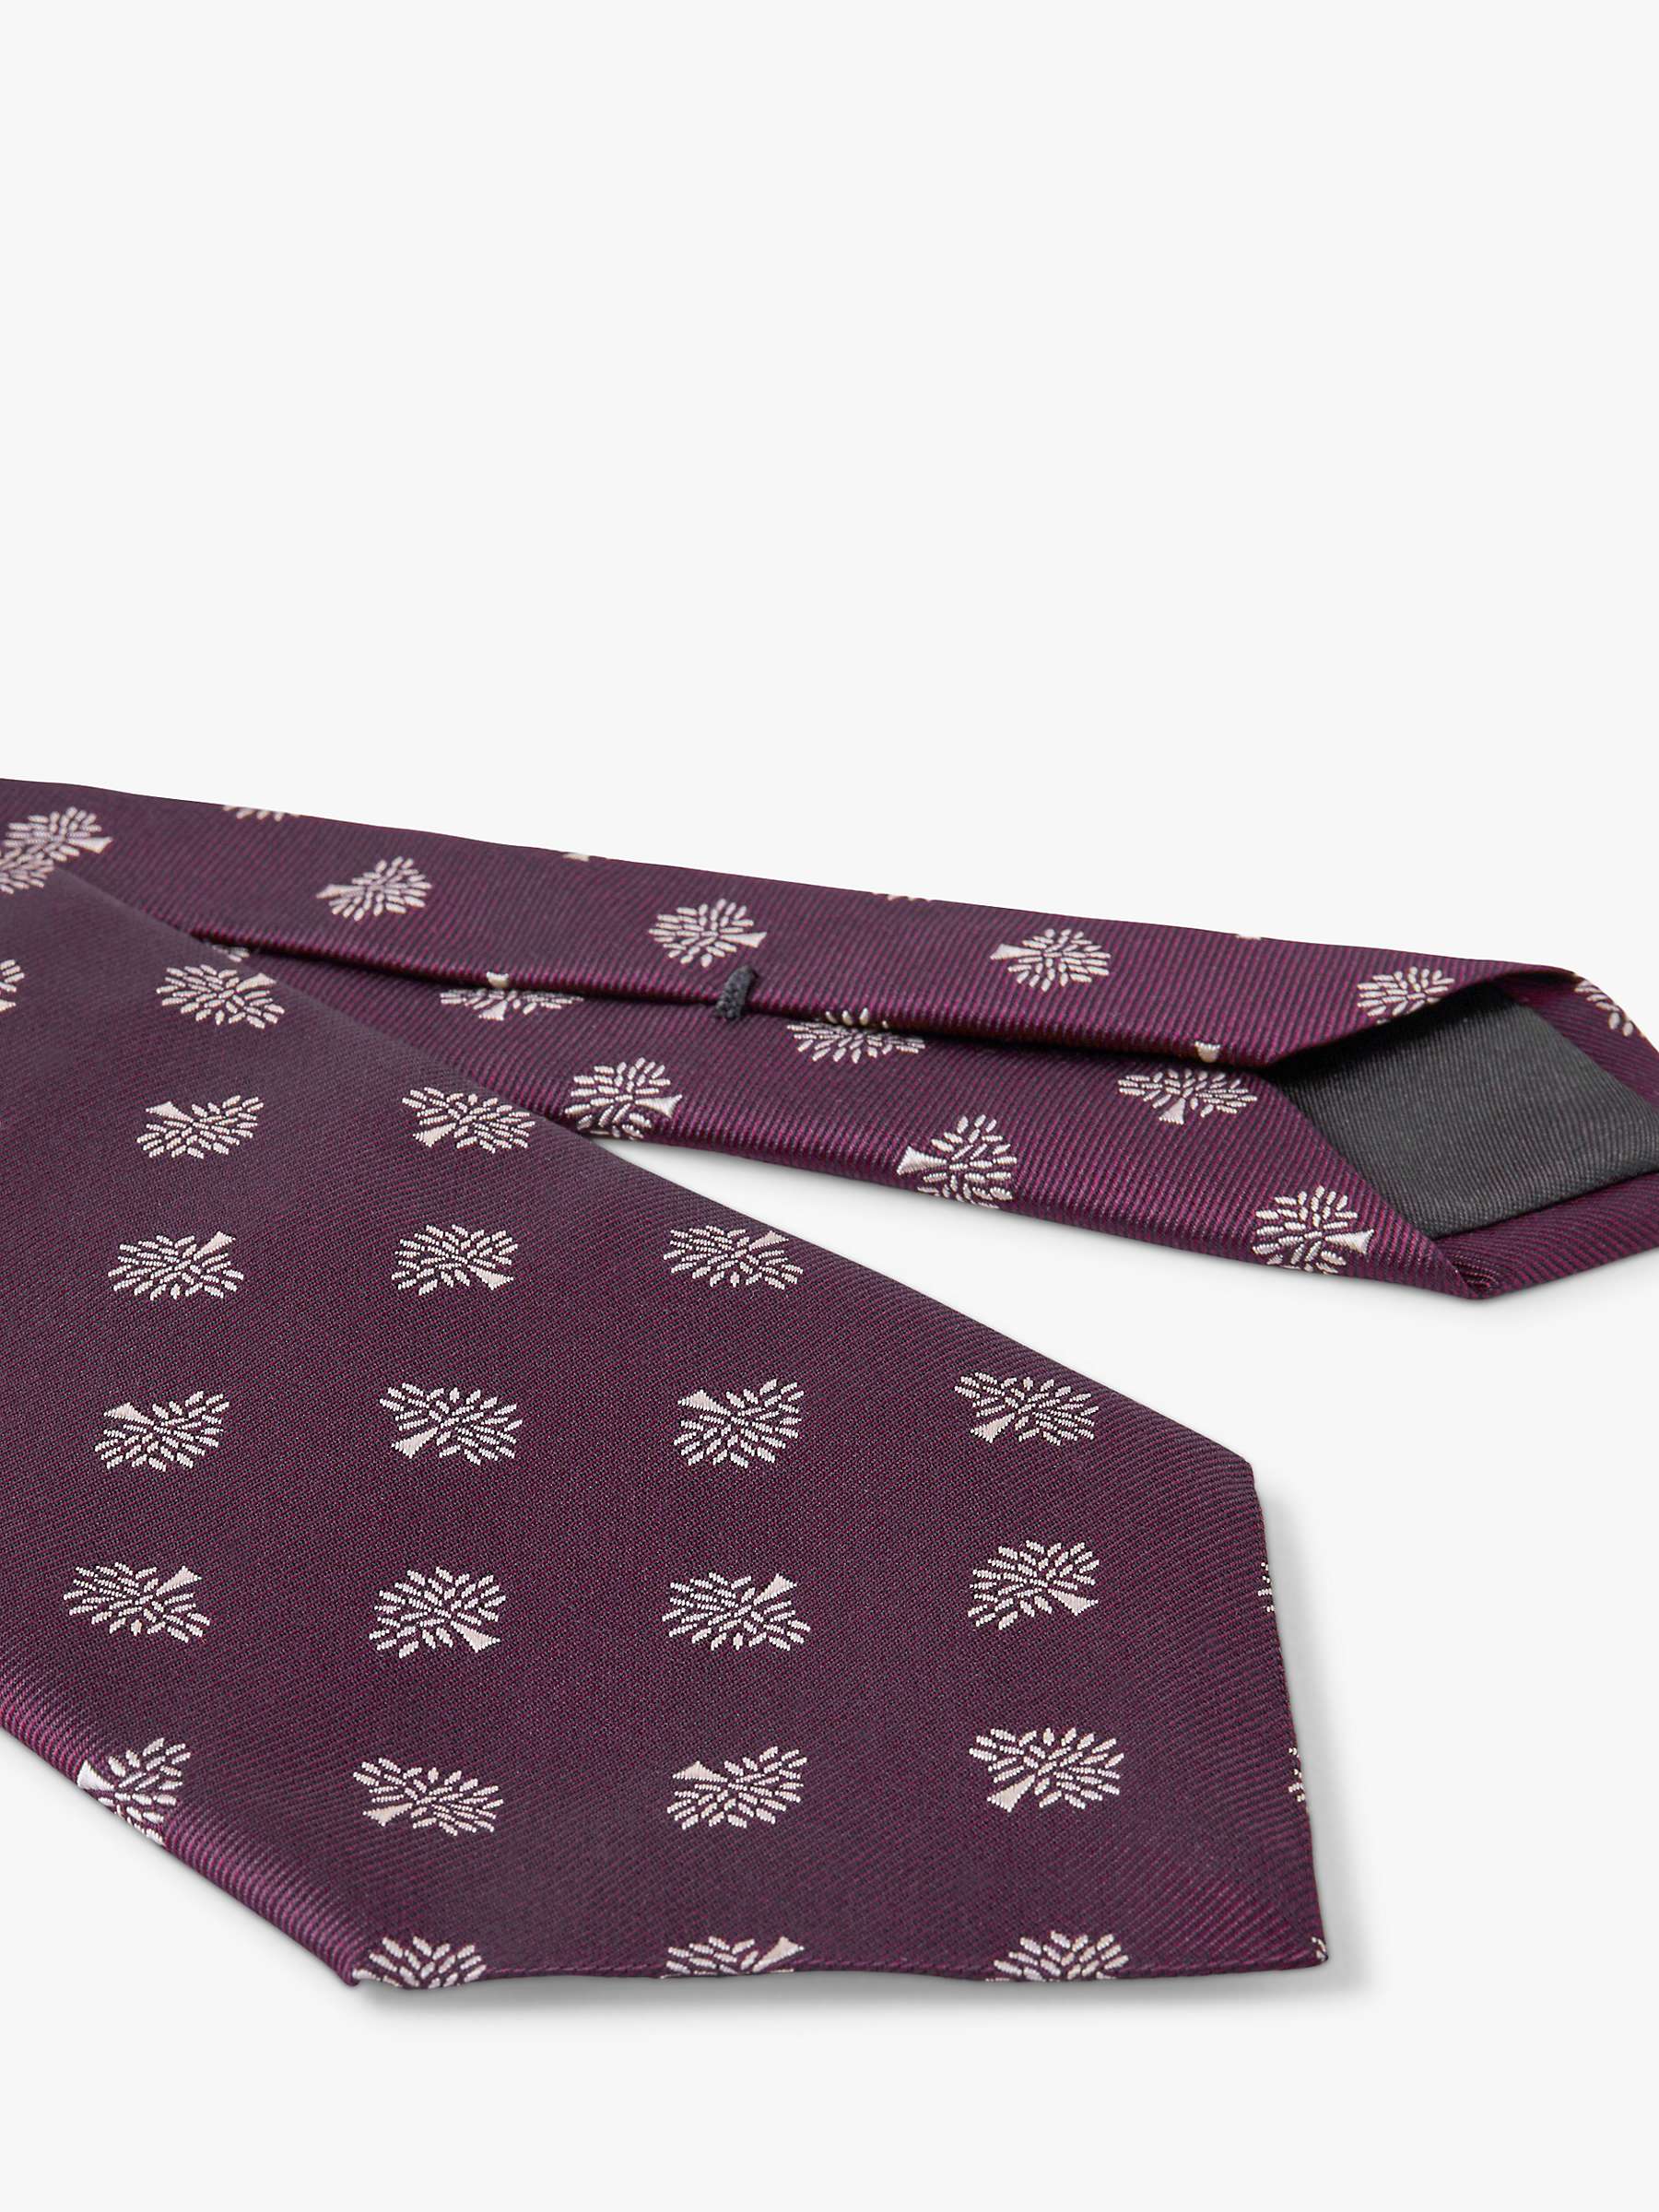 Buy Mulberry All Over Tree Silk Tie Online at johnlewis.com